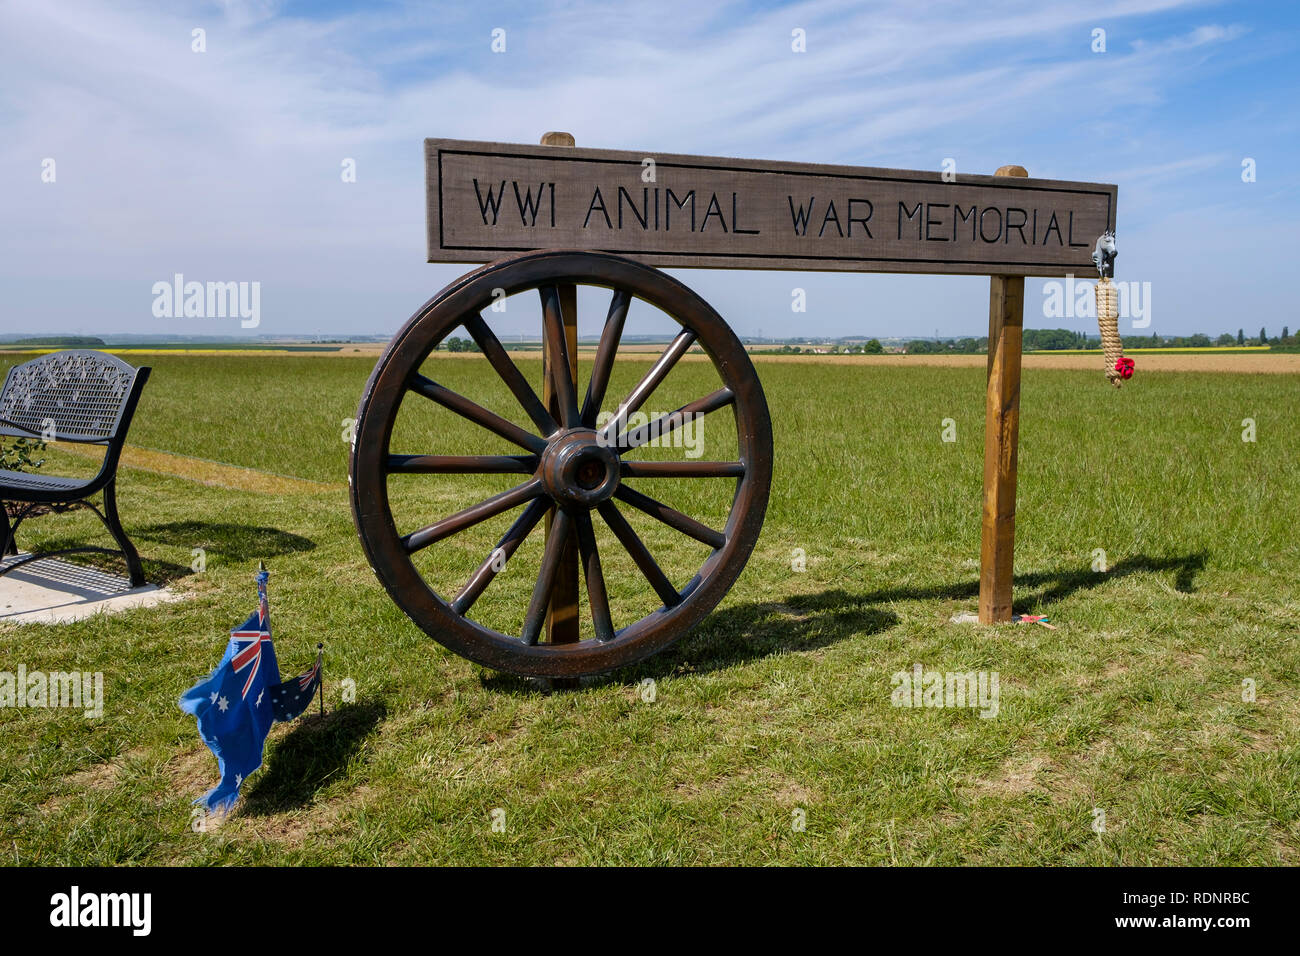 The World War 1 Animal War Memorial, Pozieres, France. Stock Photo